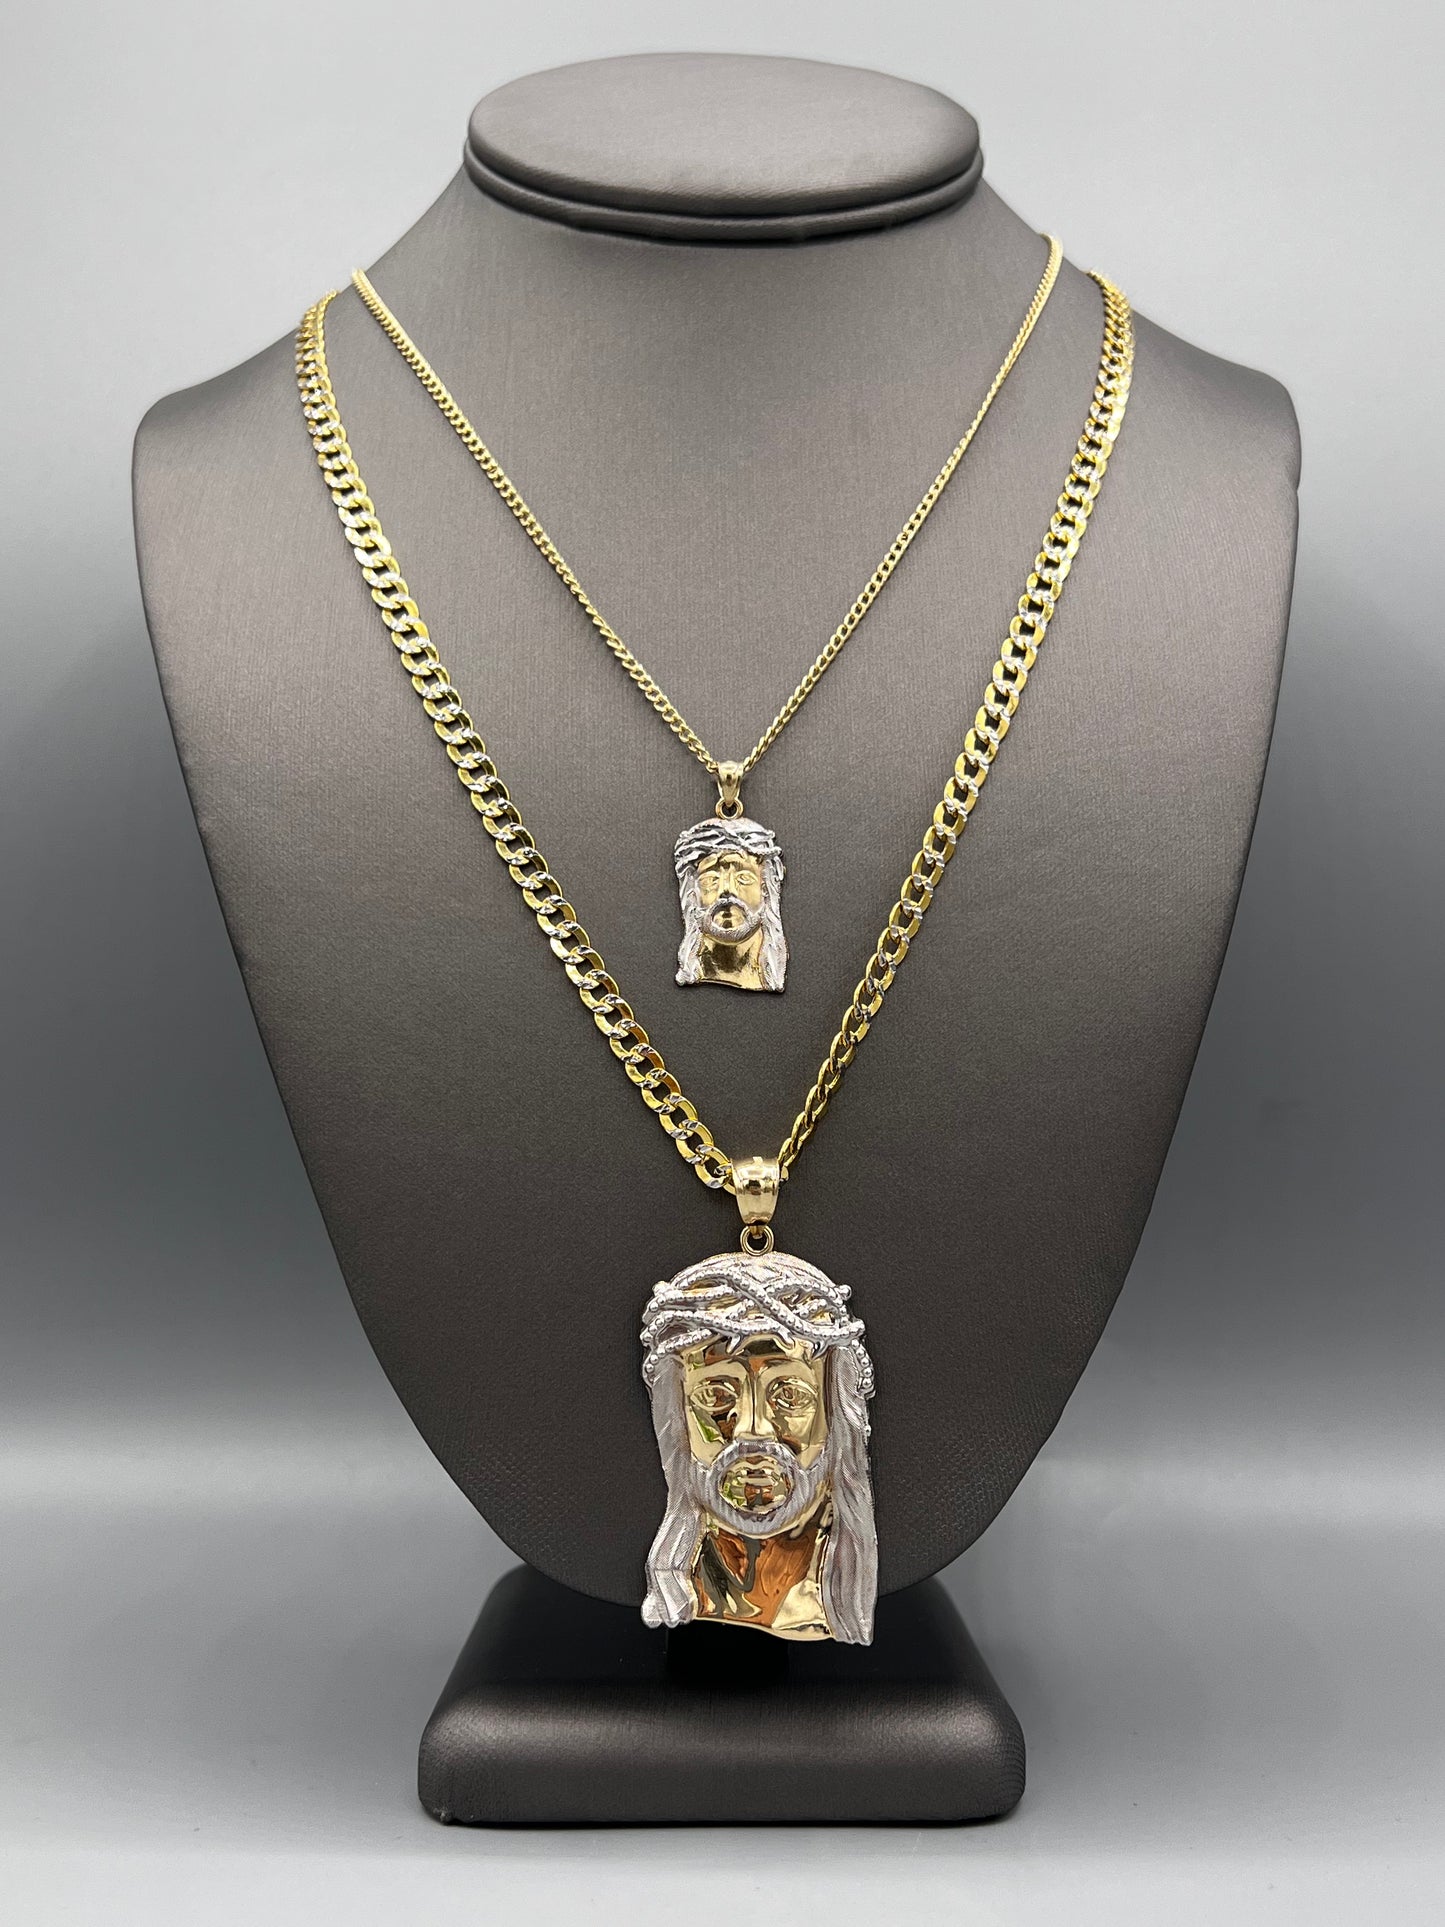 New 🔥 14K Jesus Face With Free Small Chain by GDO